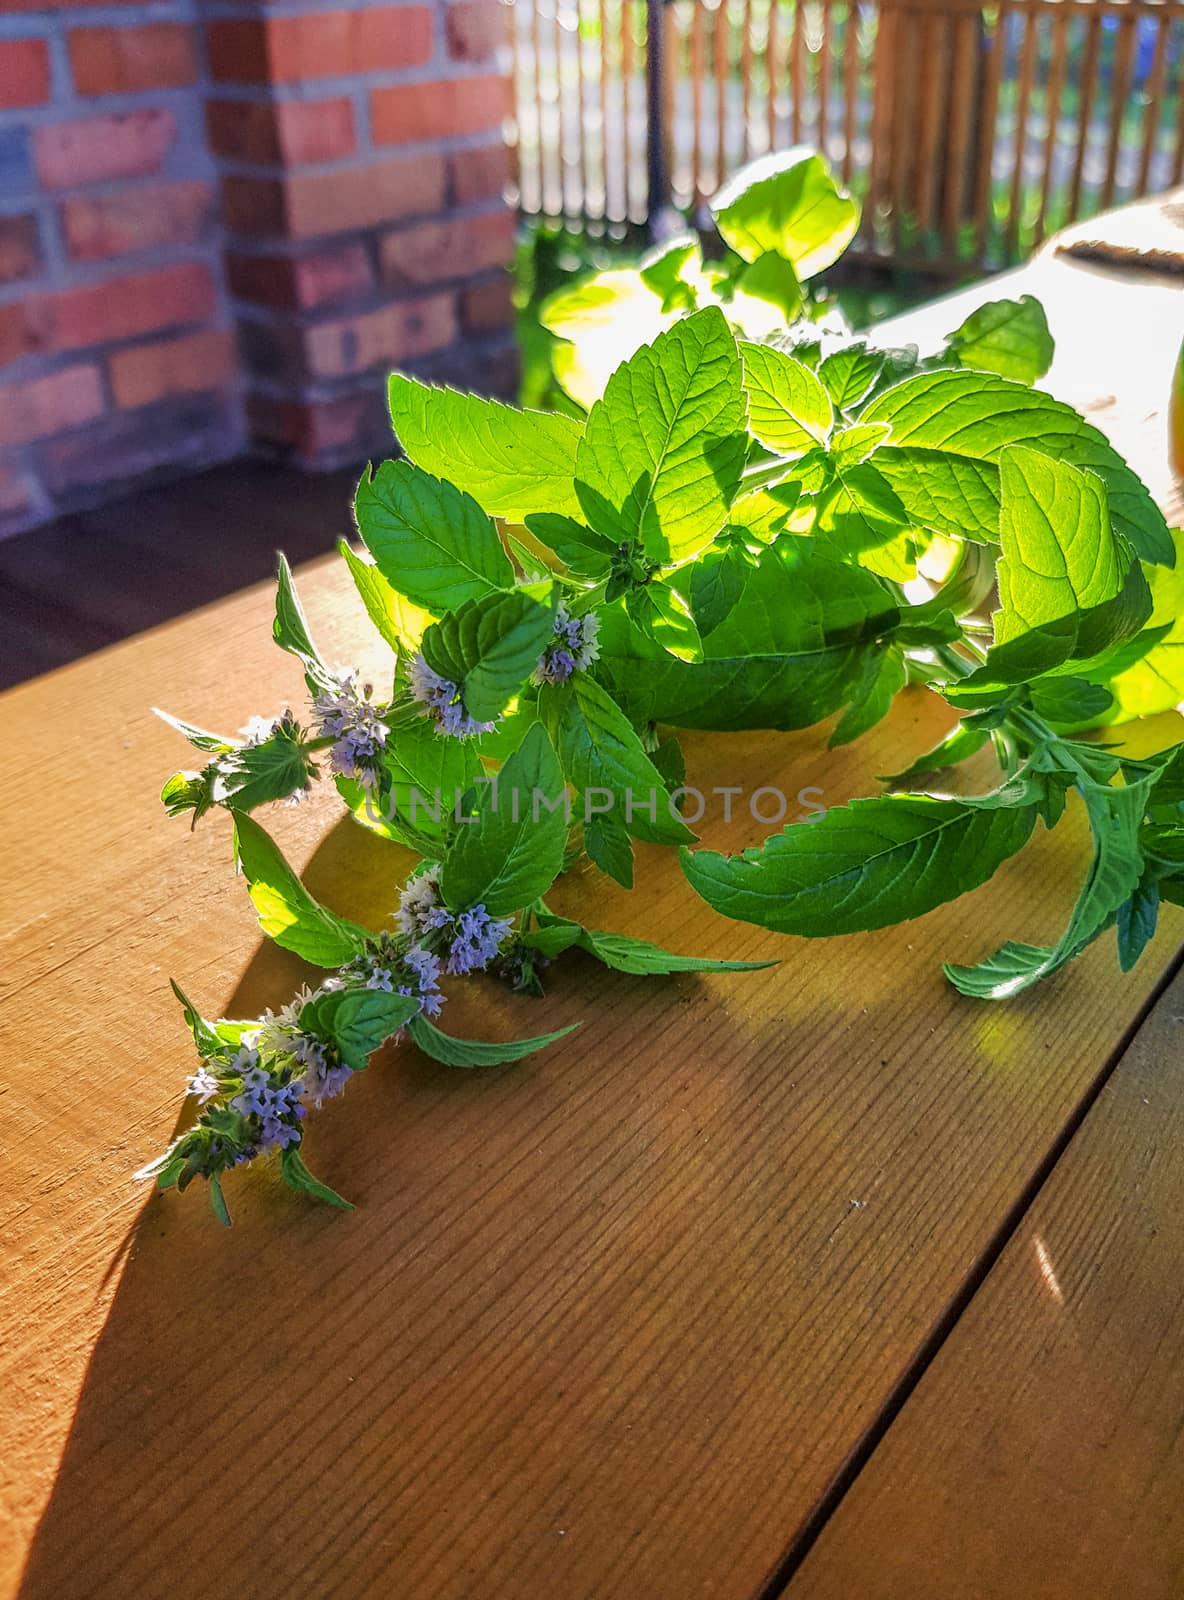 Blooming sprig of mint on a wooden background, evening Sunny Golden light, outdoor, close-up, romantic by claire_lucia